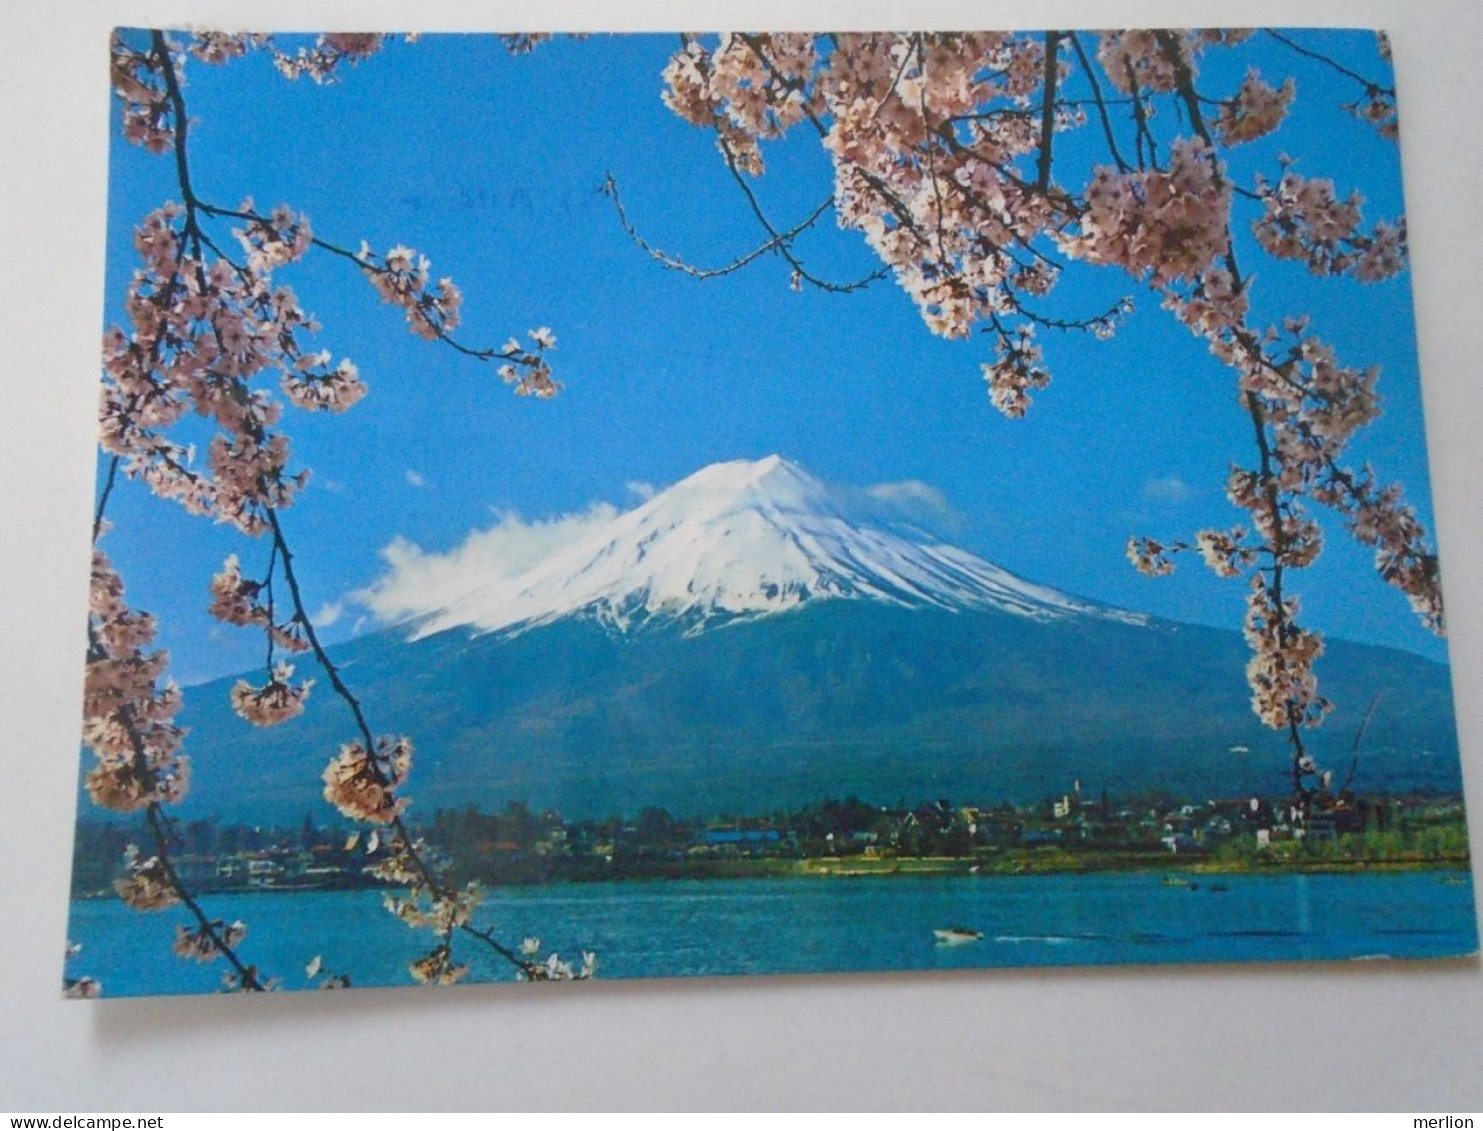 D203237  CPM - Japan Nippon - Mt. Fuji And Cherry Blossoms  1970's - Tokyo